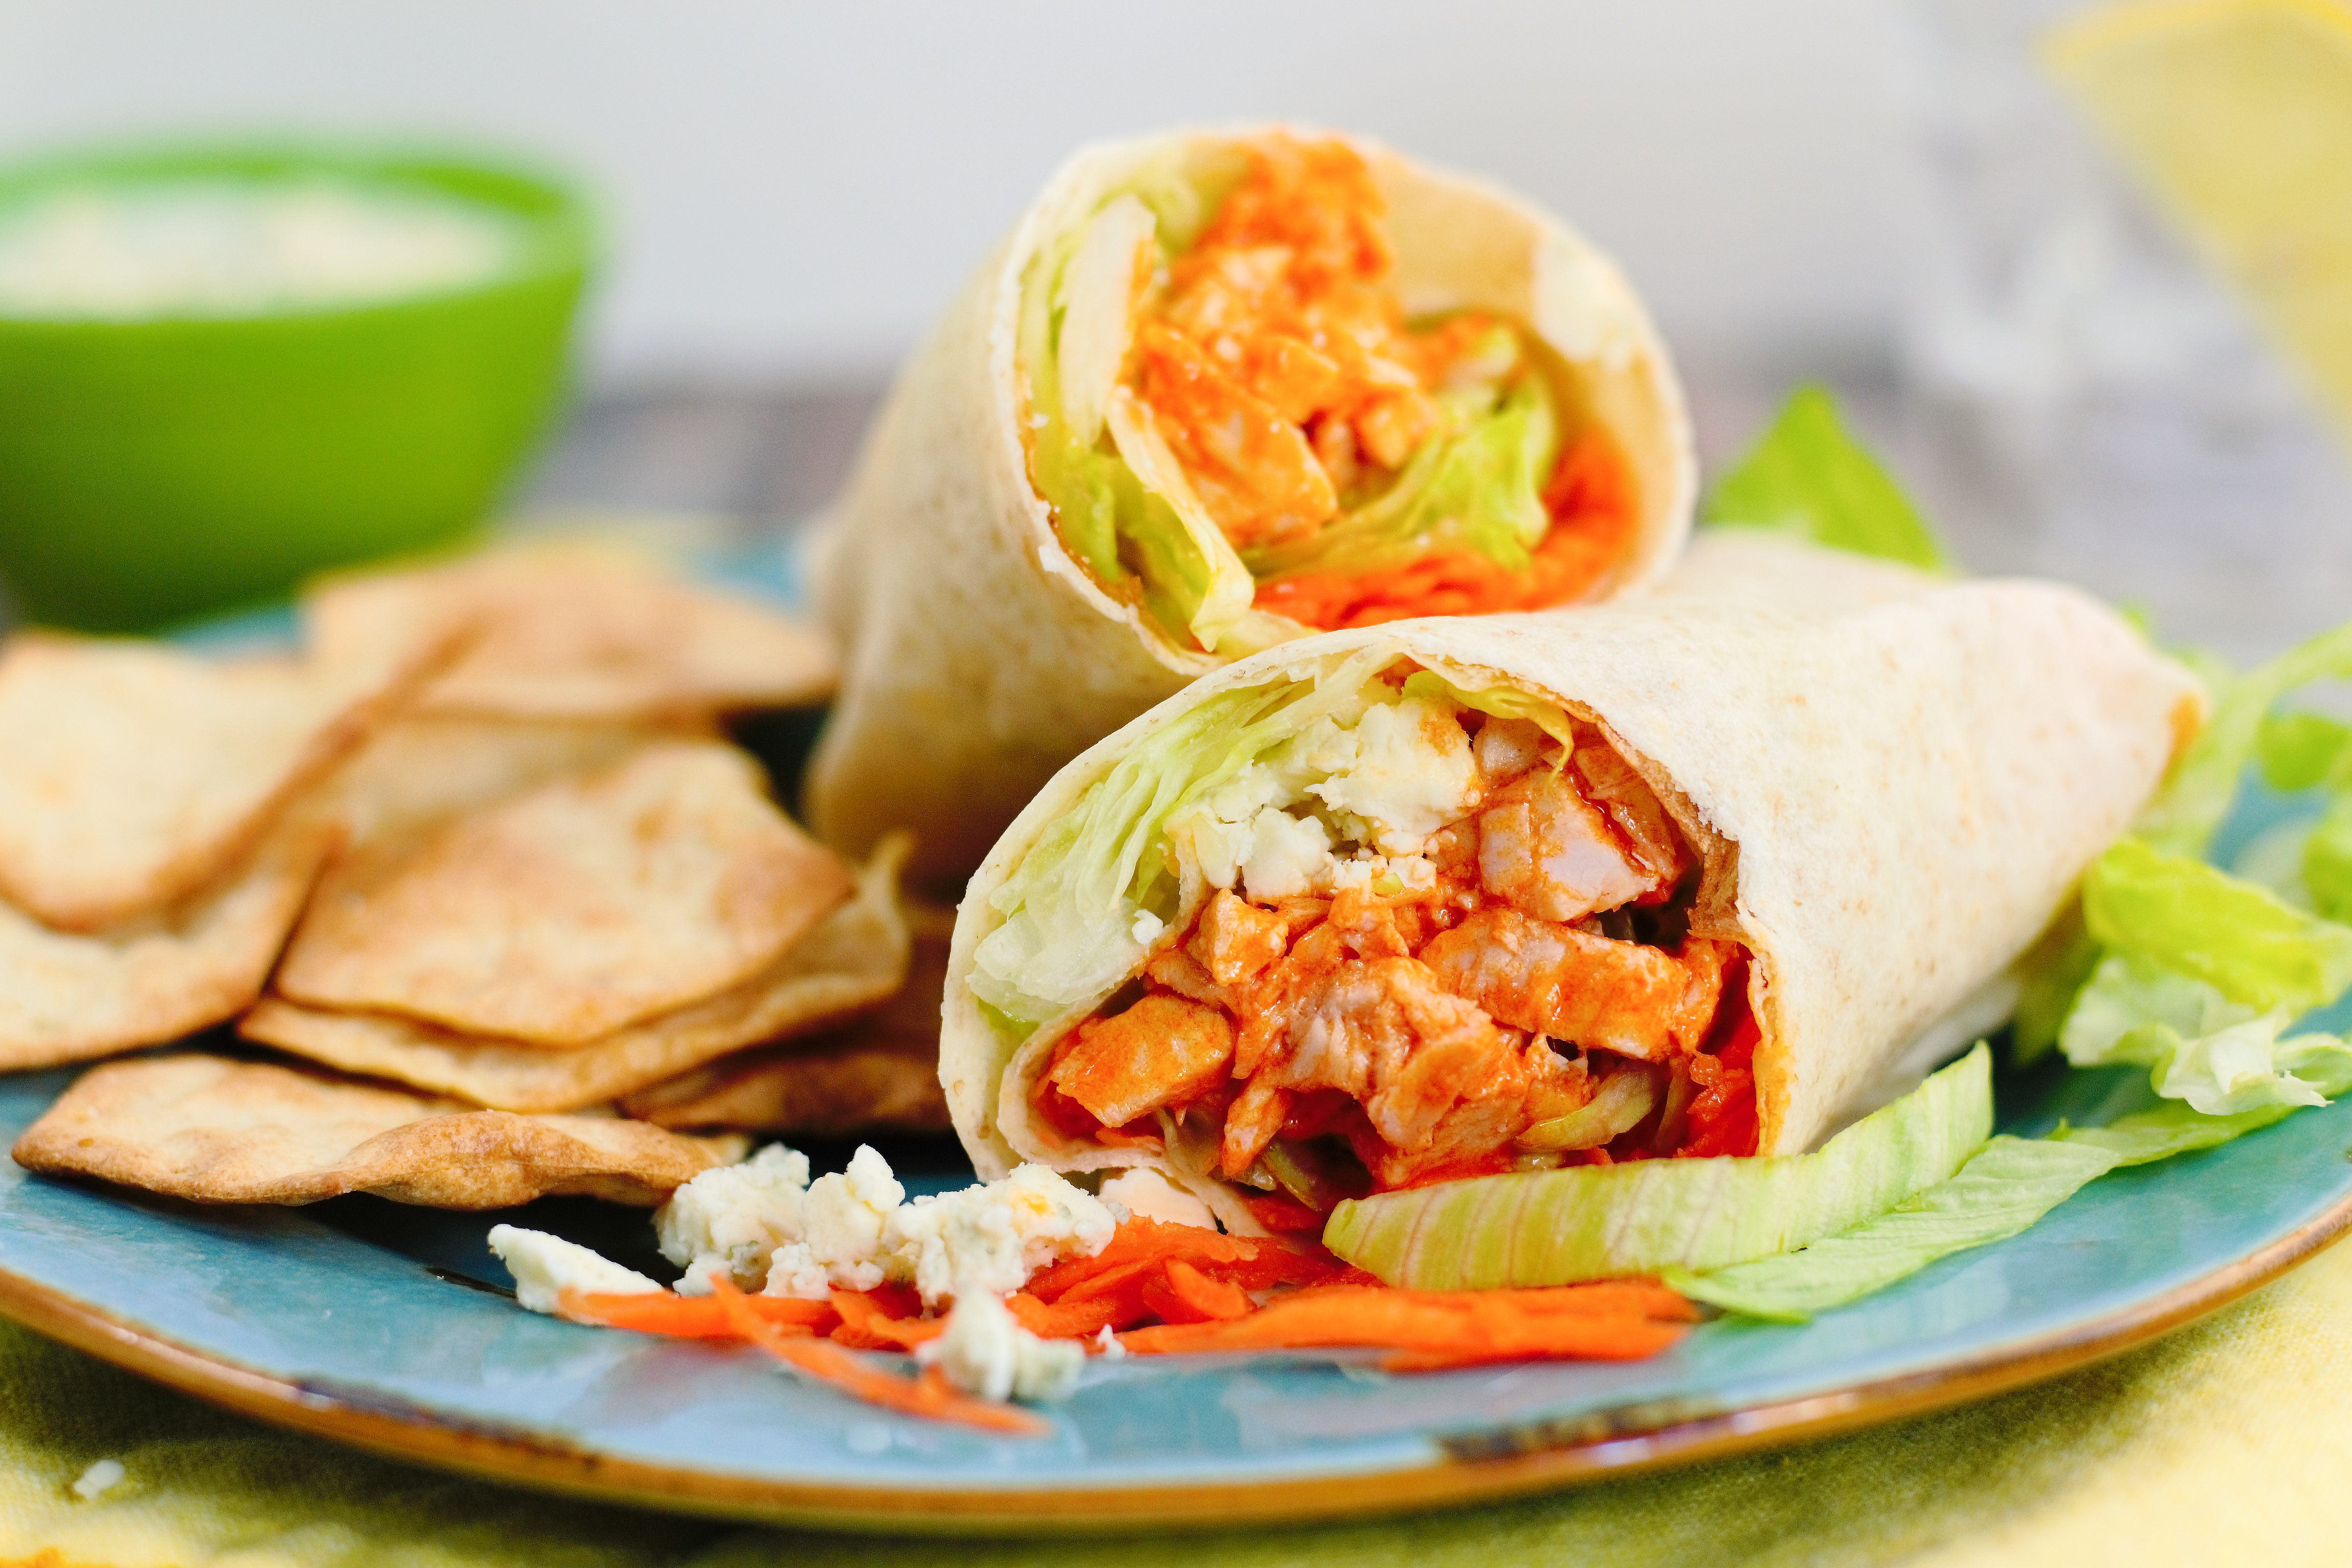 The Best Chicken Club Wrap Recipe (with video) • Bake Me Some Sugar